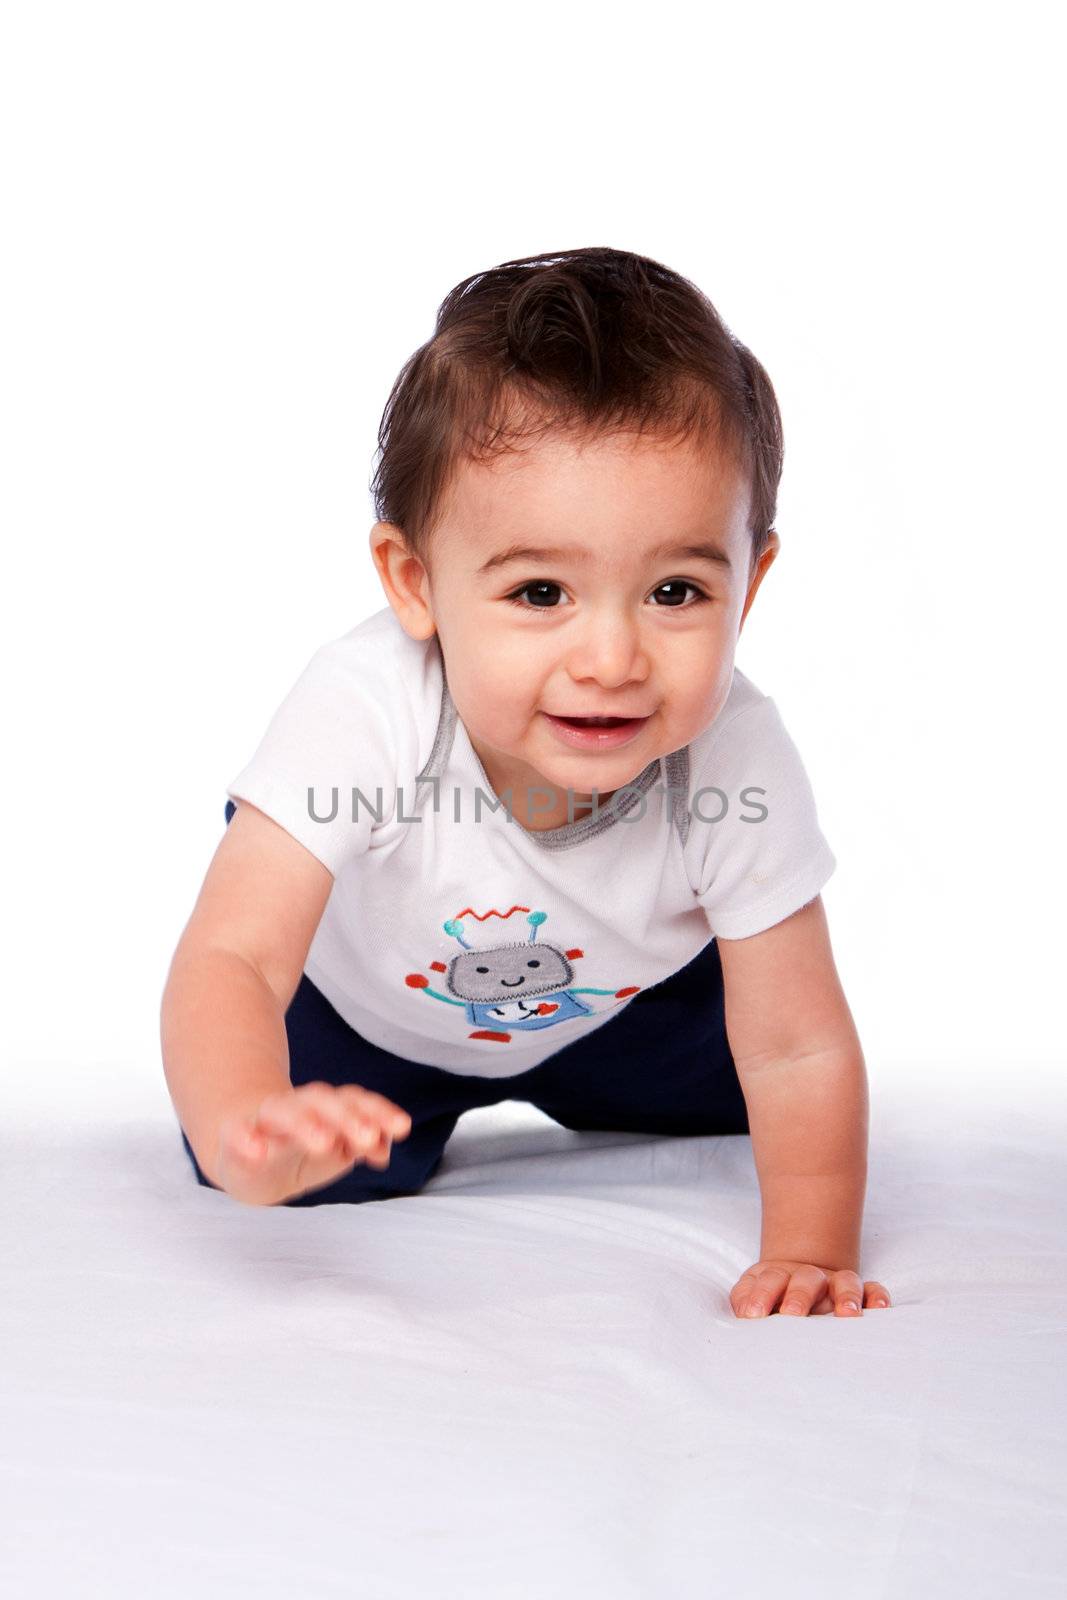 Cute happy crawling baby toddler smiling, on white. Growing up concept.